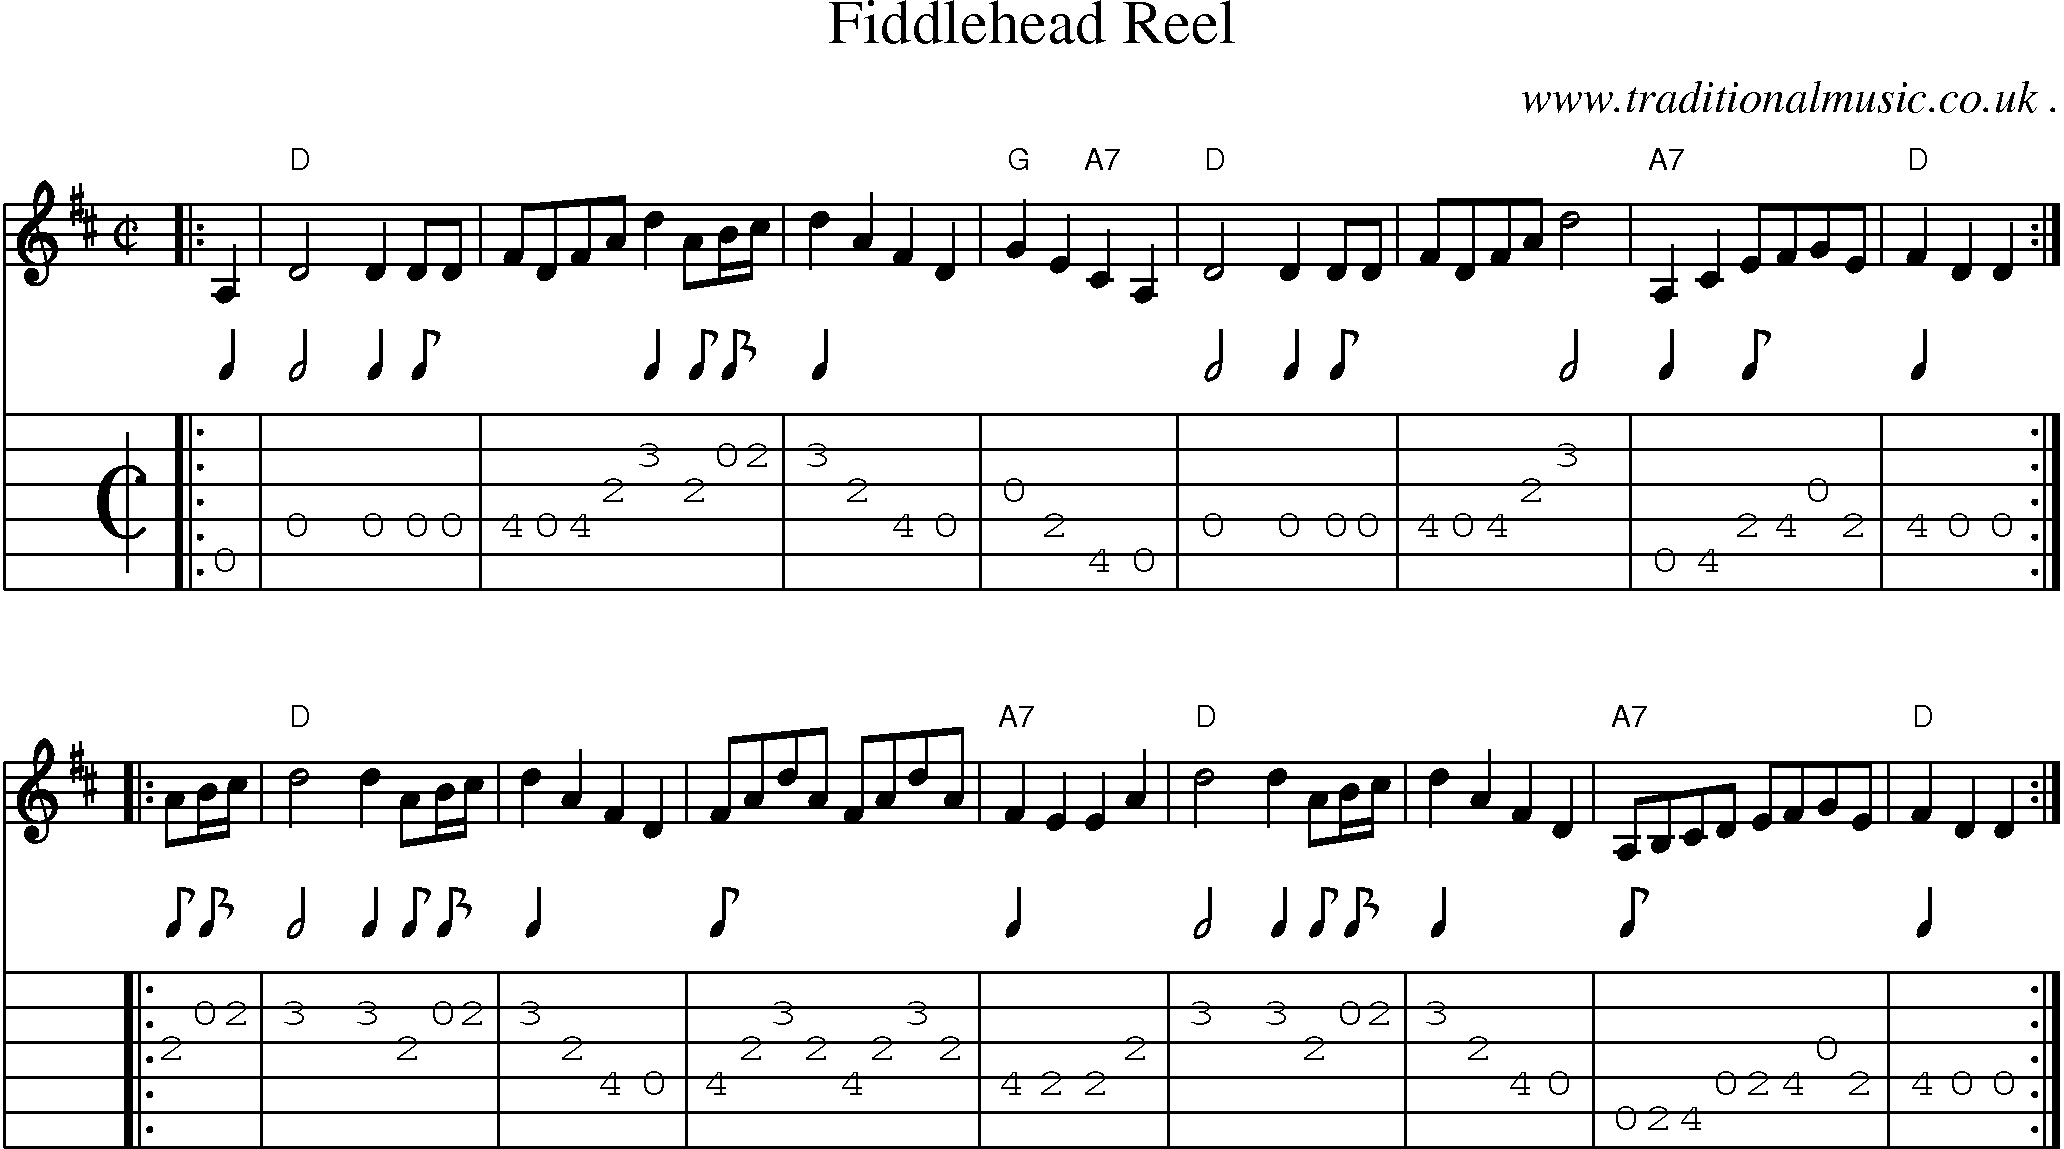 Sheet-music  score, Chords and Guitar Tabs for Fiddlehead Reel